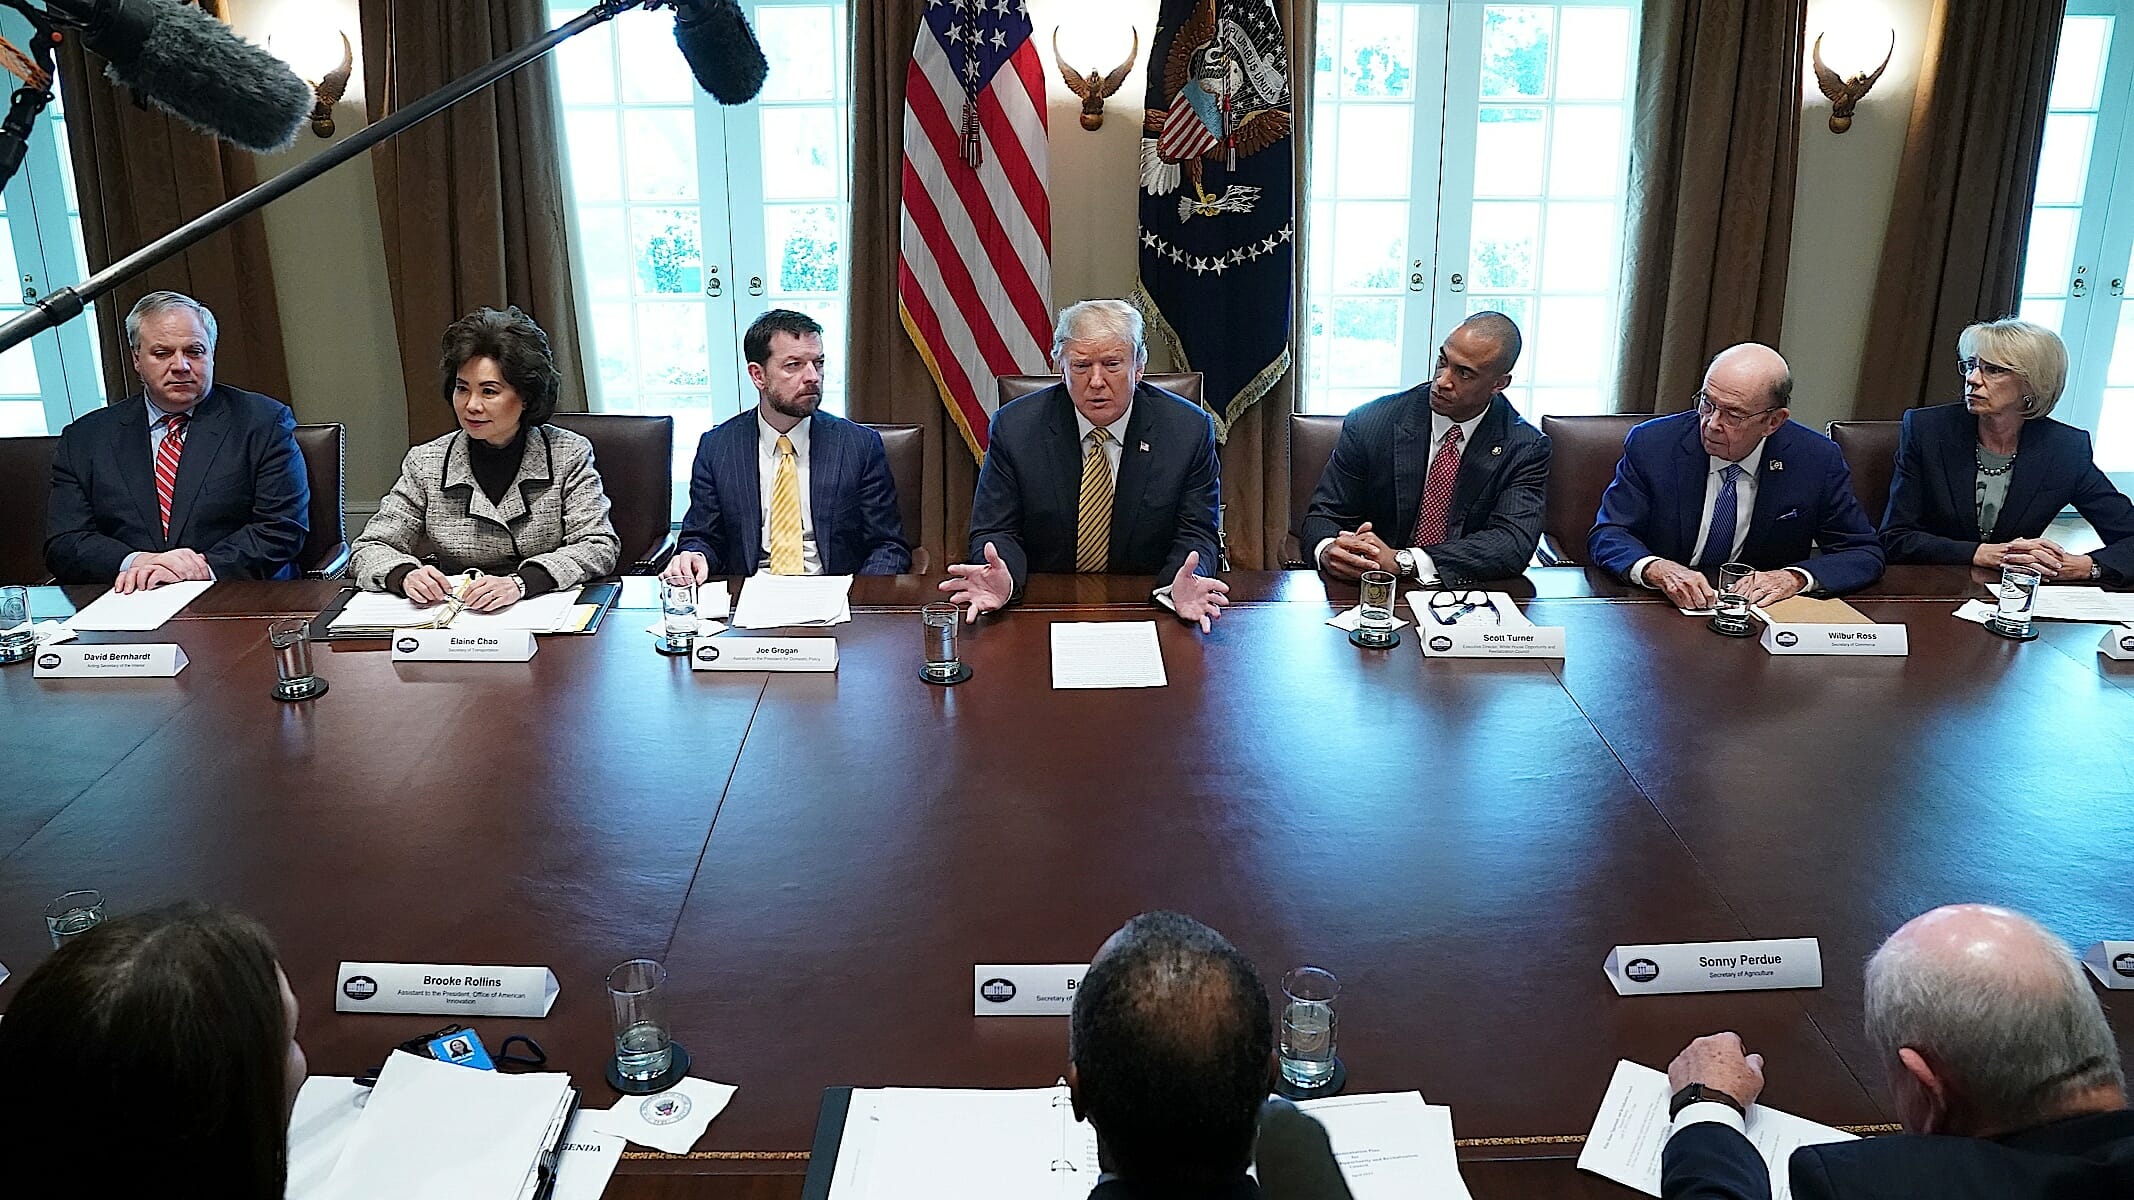 Can You Guess Which One of Trump’s Cabinet Members Keeps Falling Asleep During Meetings?